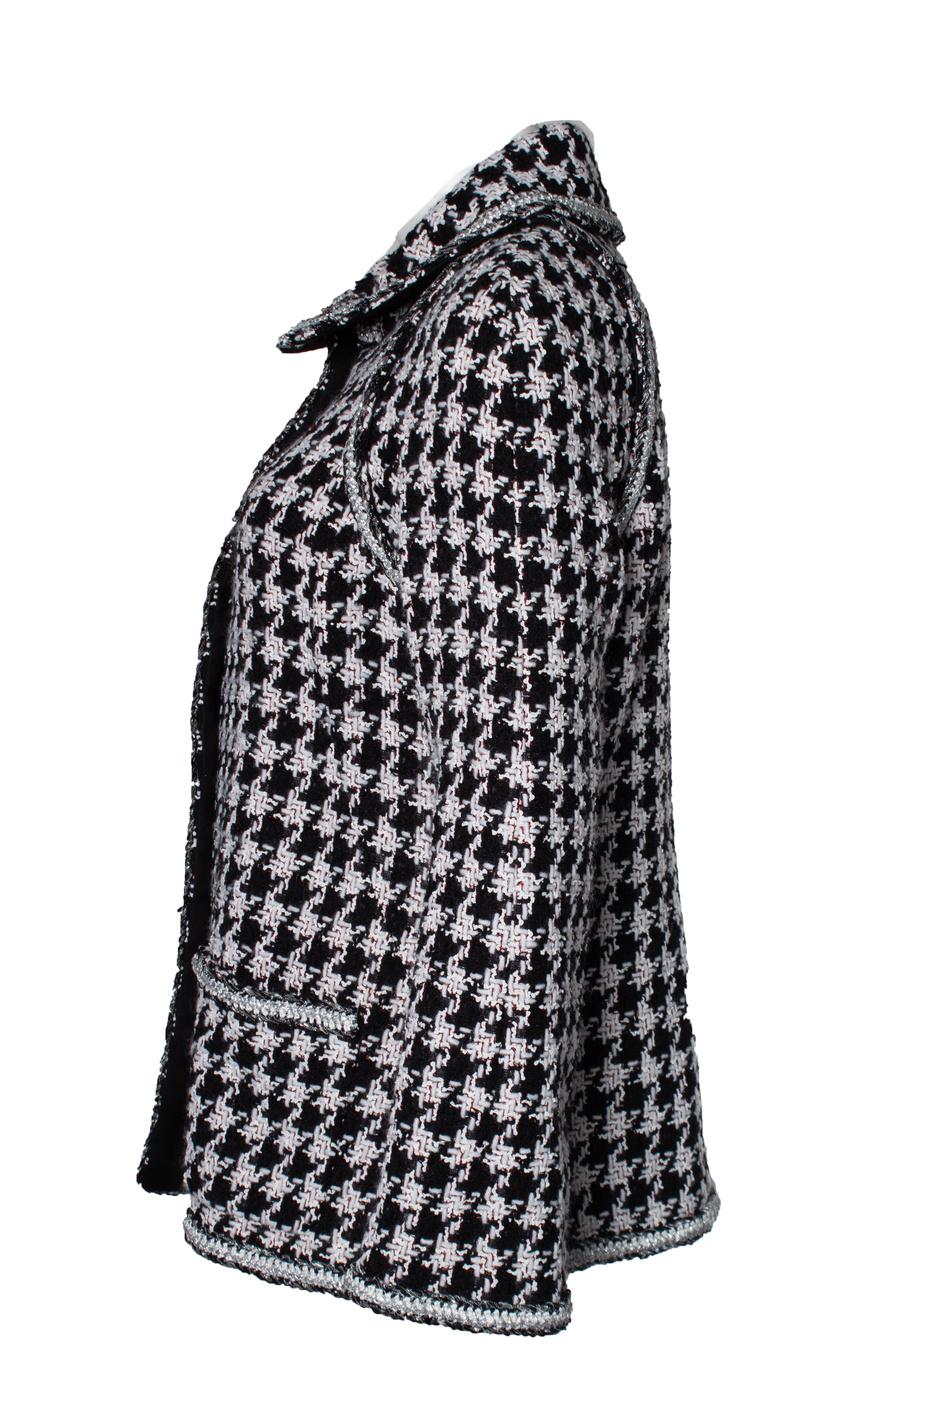 Chanel, Black and white houndstooth jacket with silver braid trimming. The item is in very good condition. Comes with Chanel hanger.

• CONDITION: very good condition 

• SIZE: FR44

• MEASUREMENTS: length 70 cm, width 47 cm, waist 47 cm, shoulder